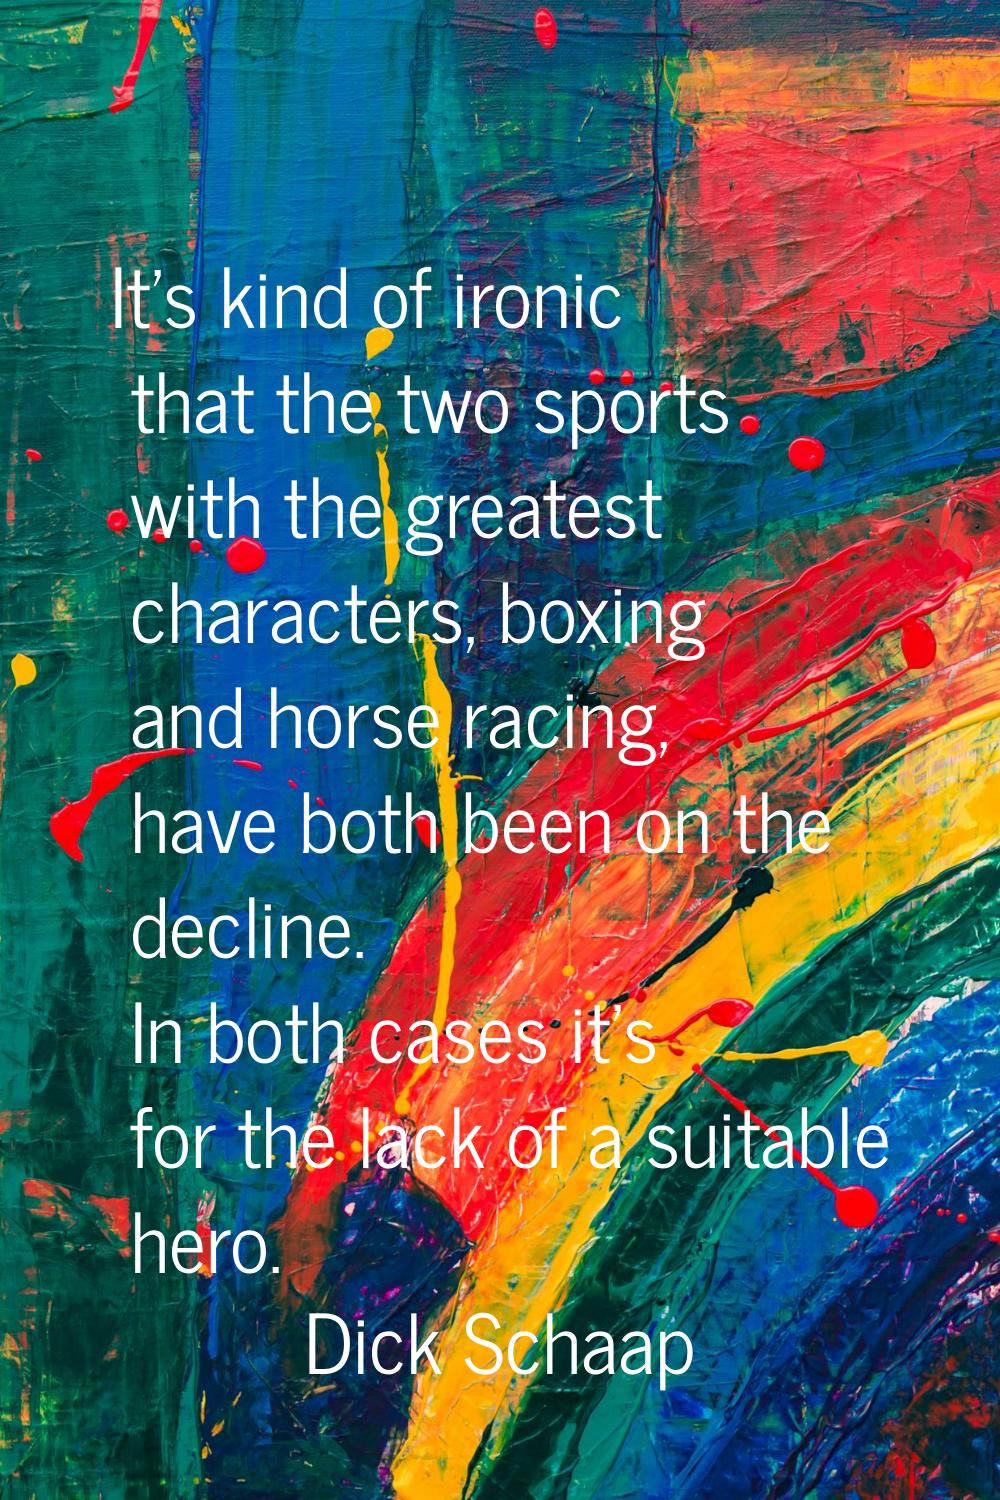 It's kind of ironic that the two sports with the greatest characters, boxing and horse racing, have